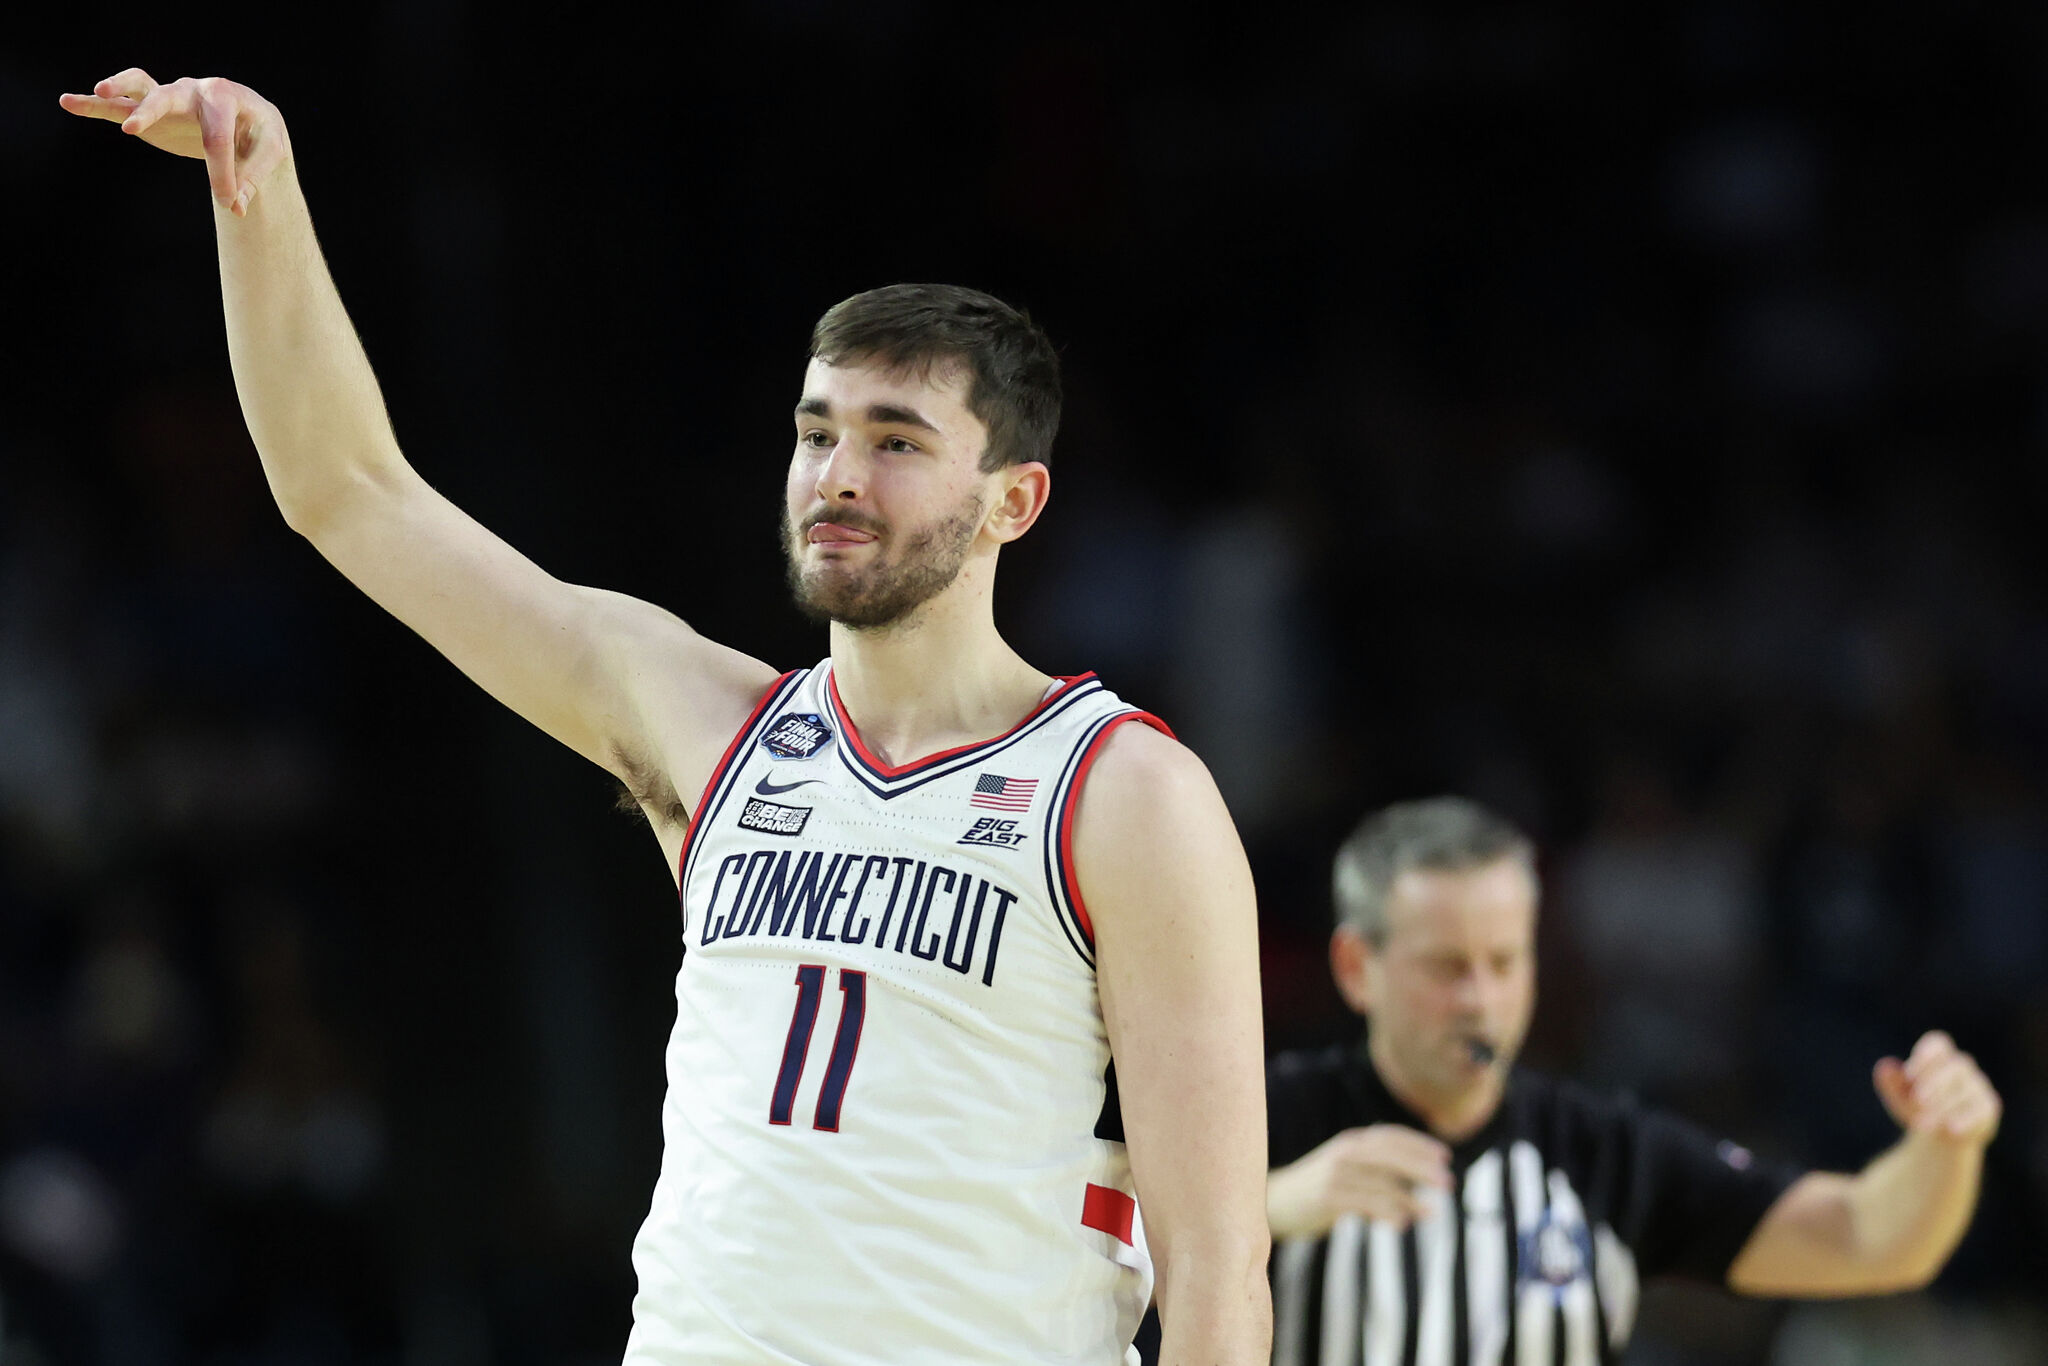 Hurley: Depth and roster balance are strengths - The UConn Blog